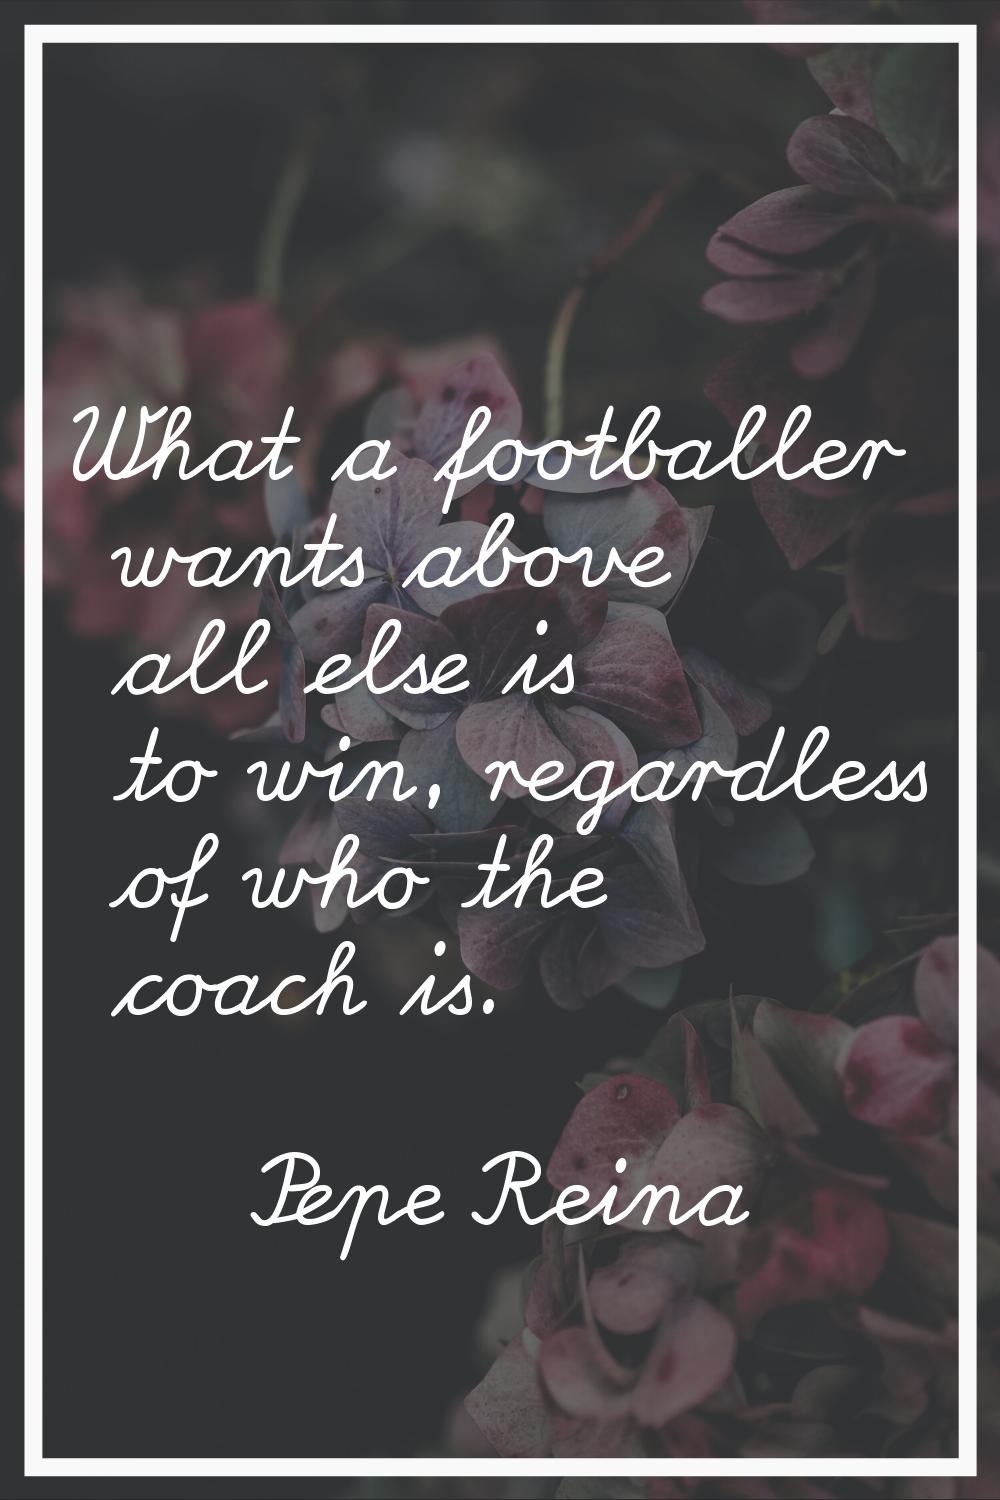 What a footballer wants above all else is to win, regardless of who the coach is.